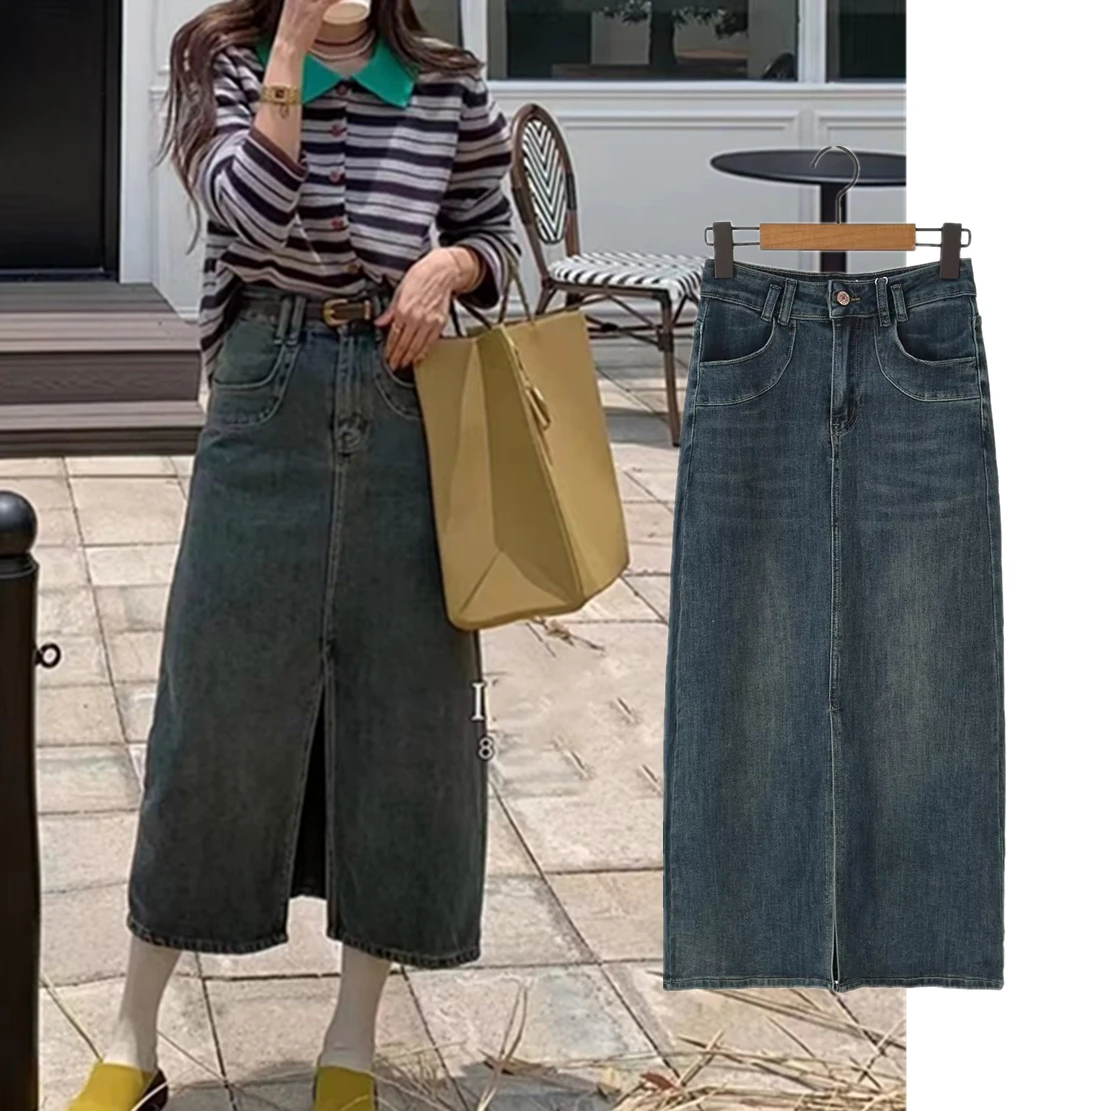 Withered Ins Fashion Blogger High Street Slit Denim Skirt High Waist Retro Washed Old Straight Midi Skirt Female american style retro high street spicy girl design sense distressed straight leg jeans women s loose and slim wide leg pants